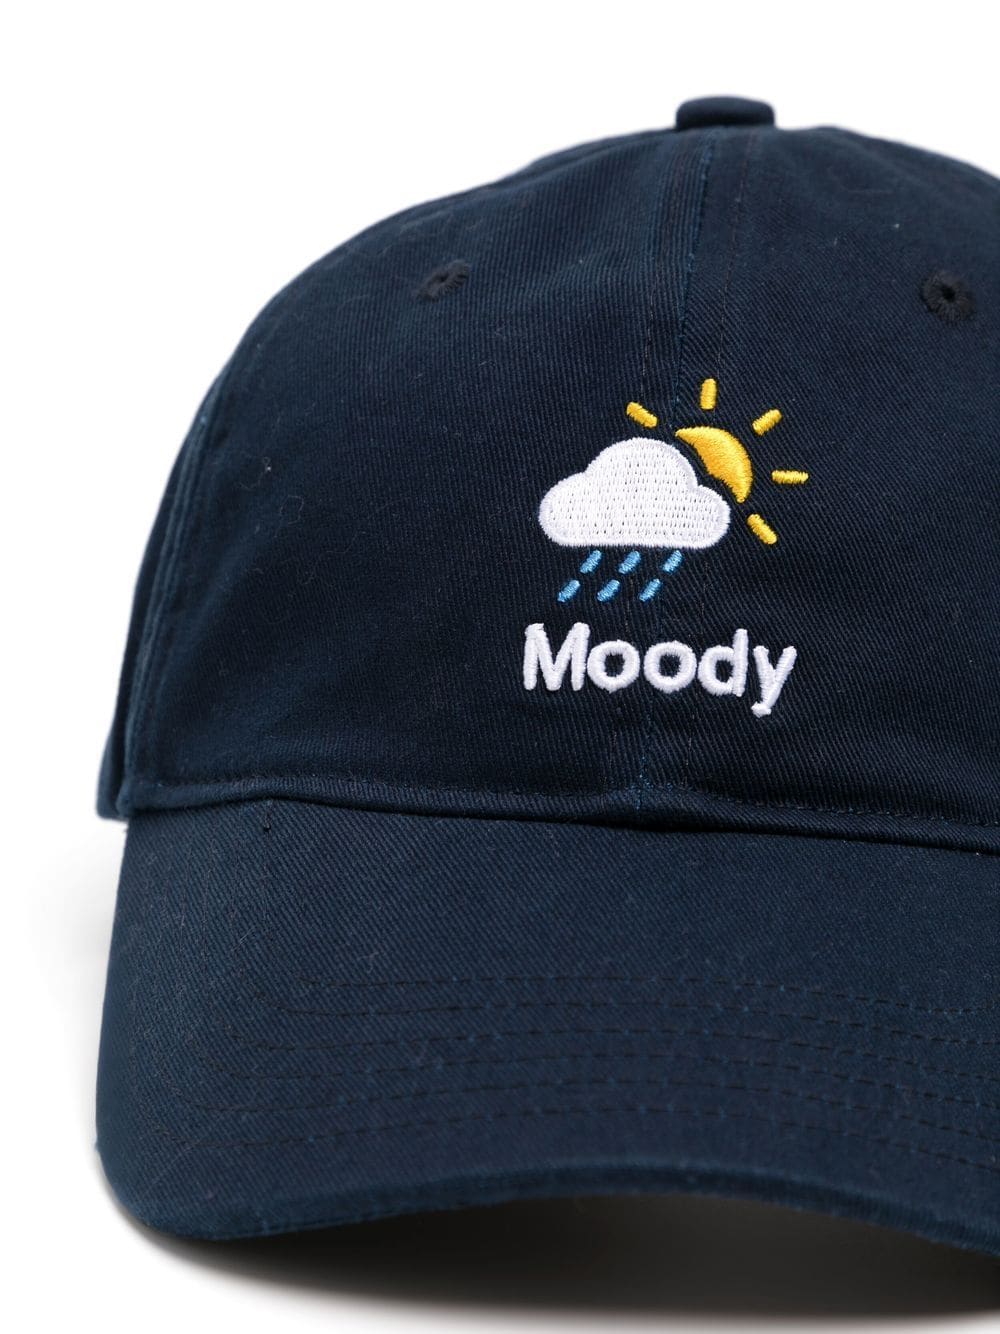 Moody Embroidery Washed Cap